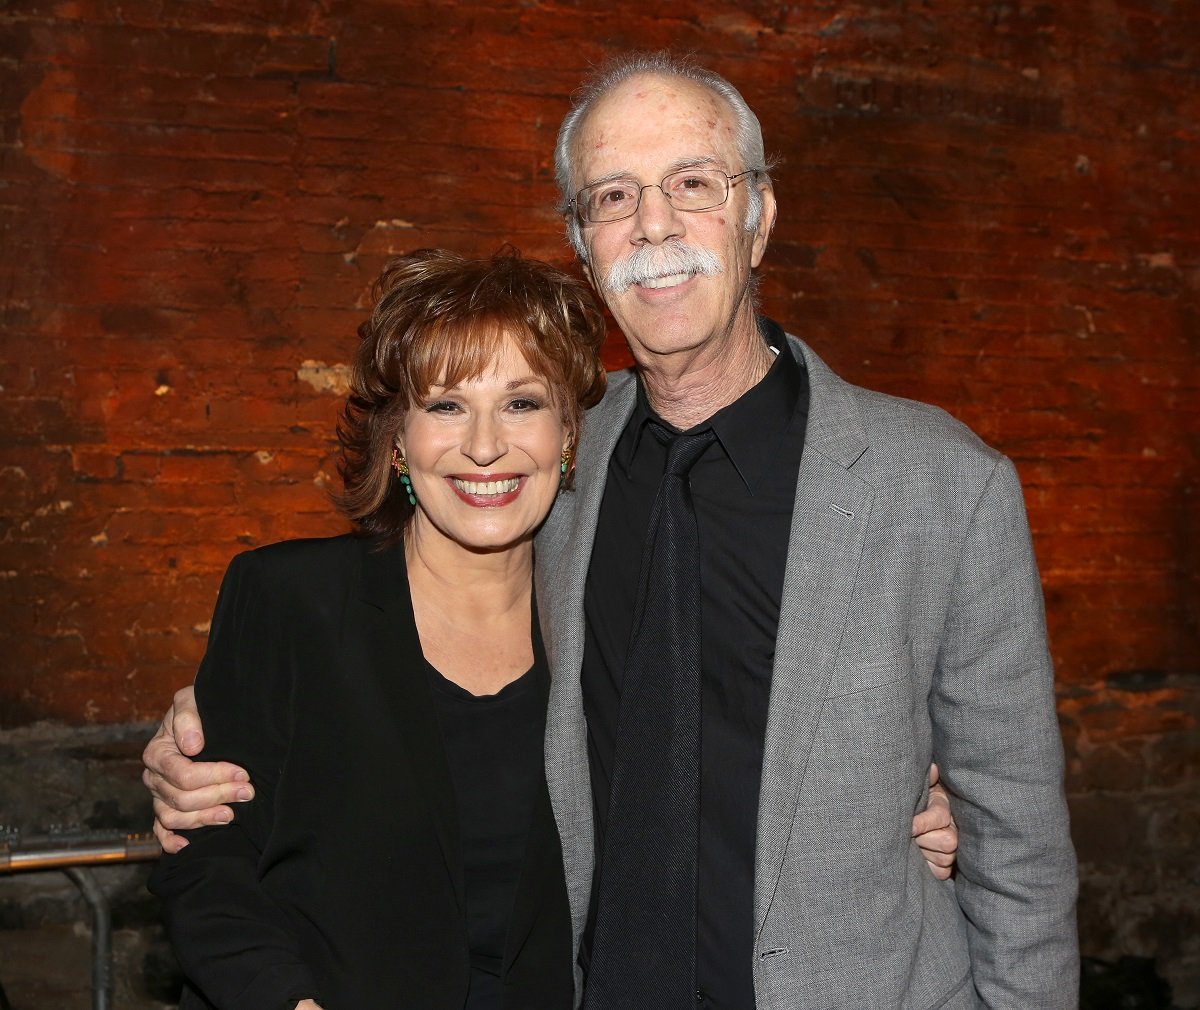 'The View' host Joy Behar in black, and her husband Steve Janowitz in a grey suit; smile for a photo.